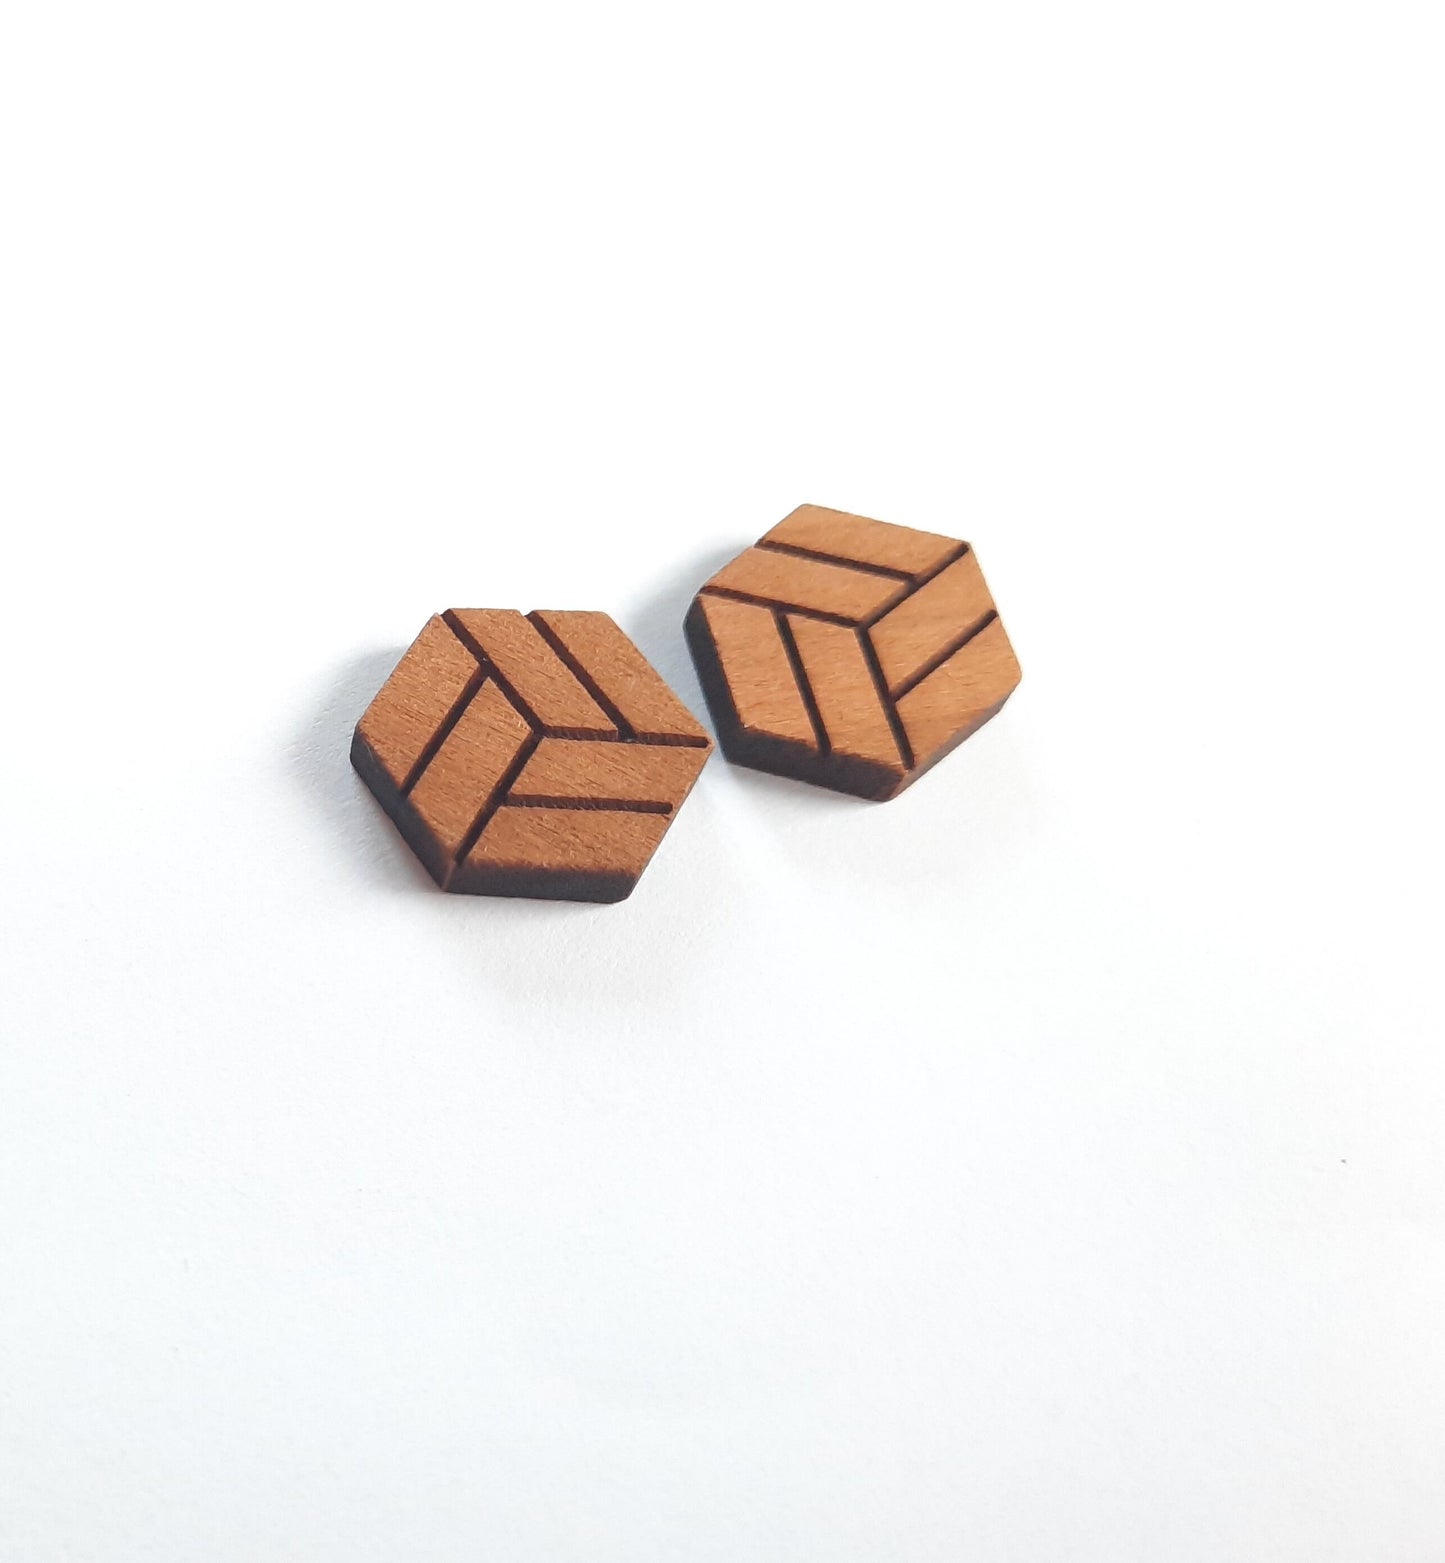 Ohrstecker Sechseck Hexagon 3D retro Muster Wabe Holz Ohrringe